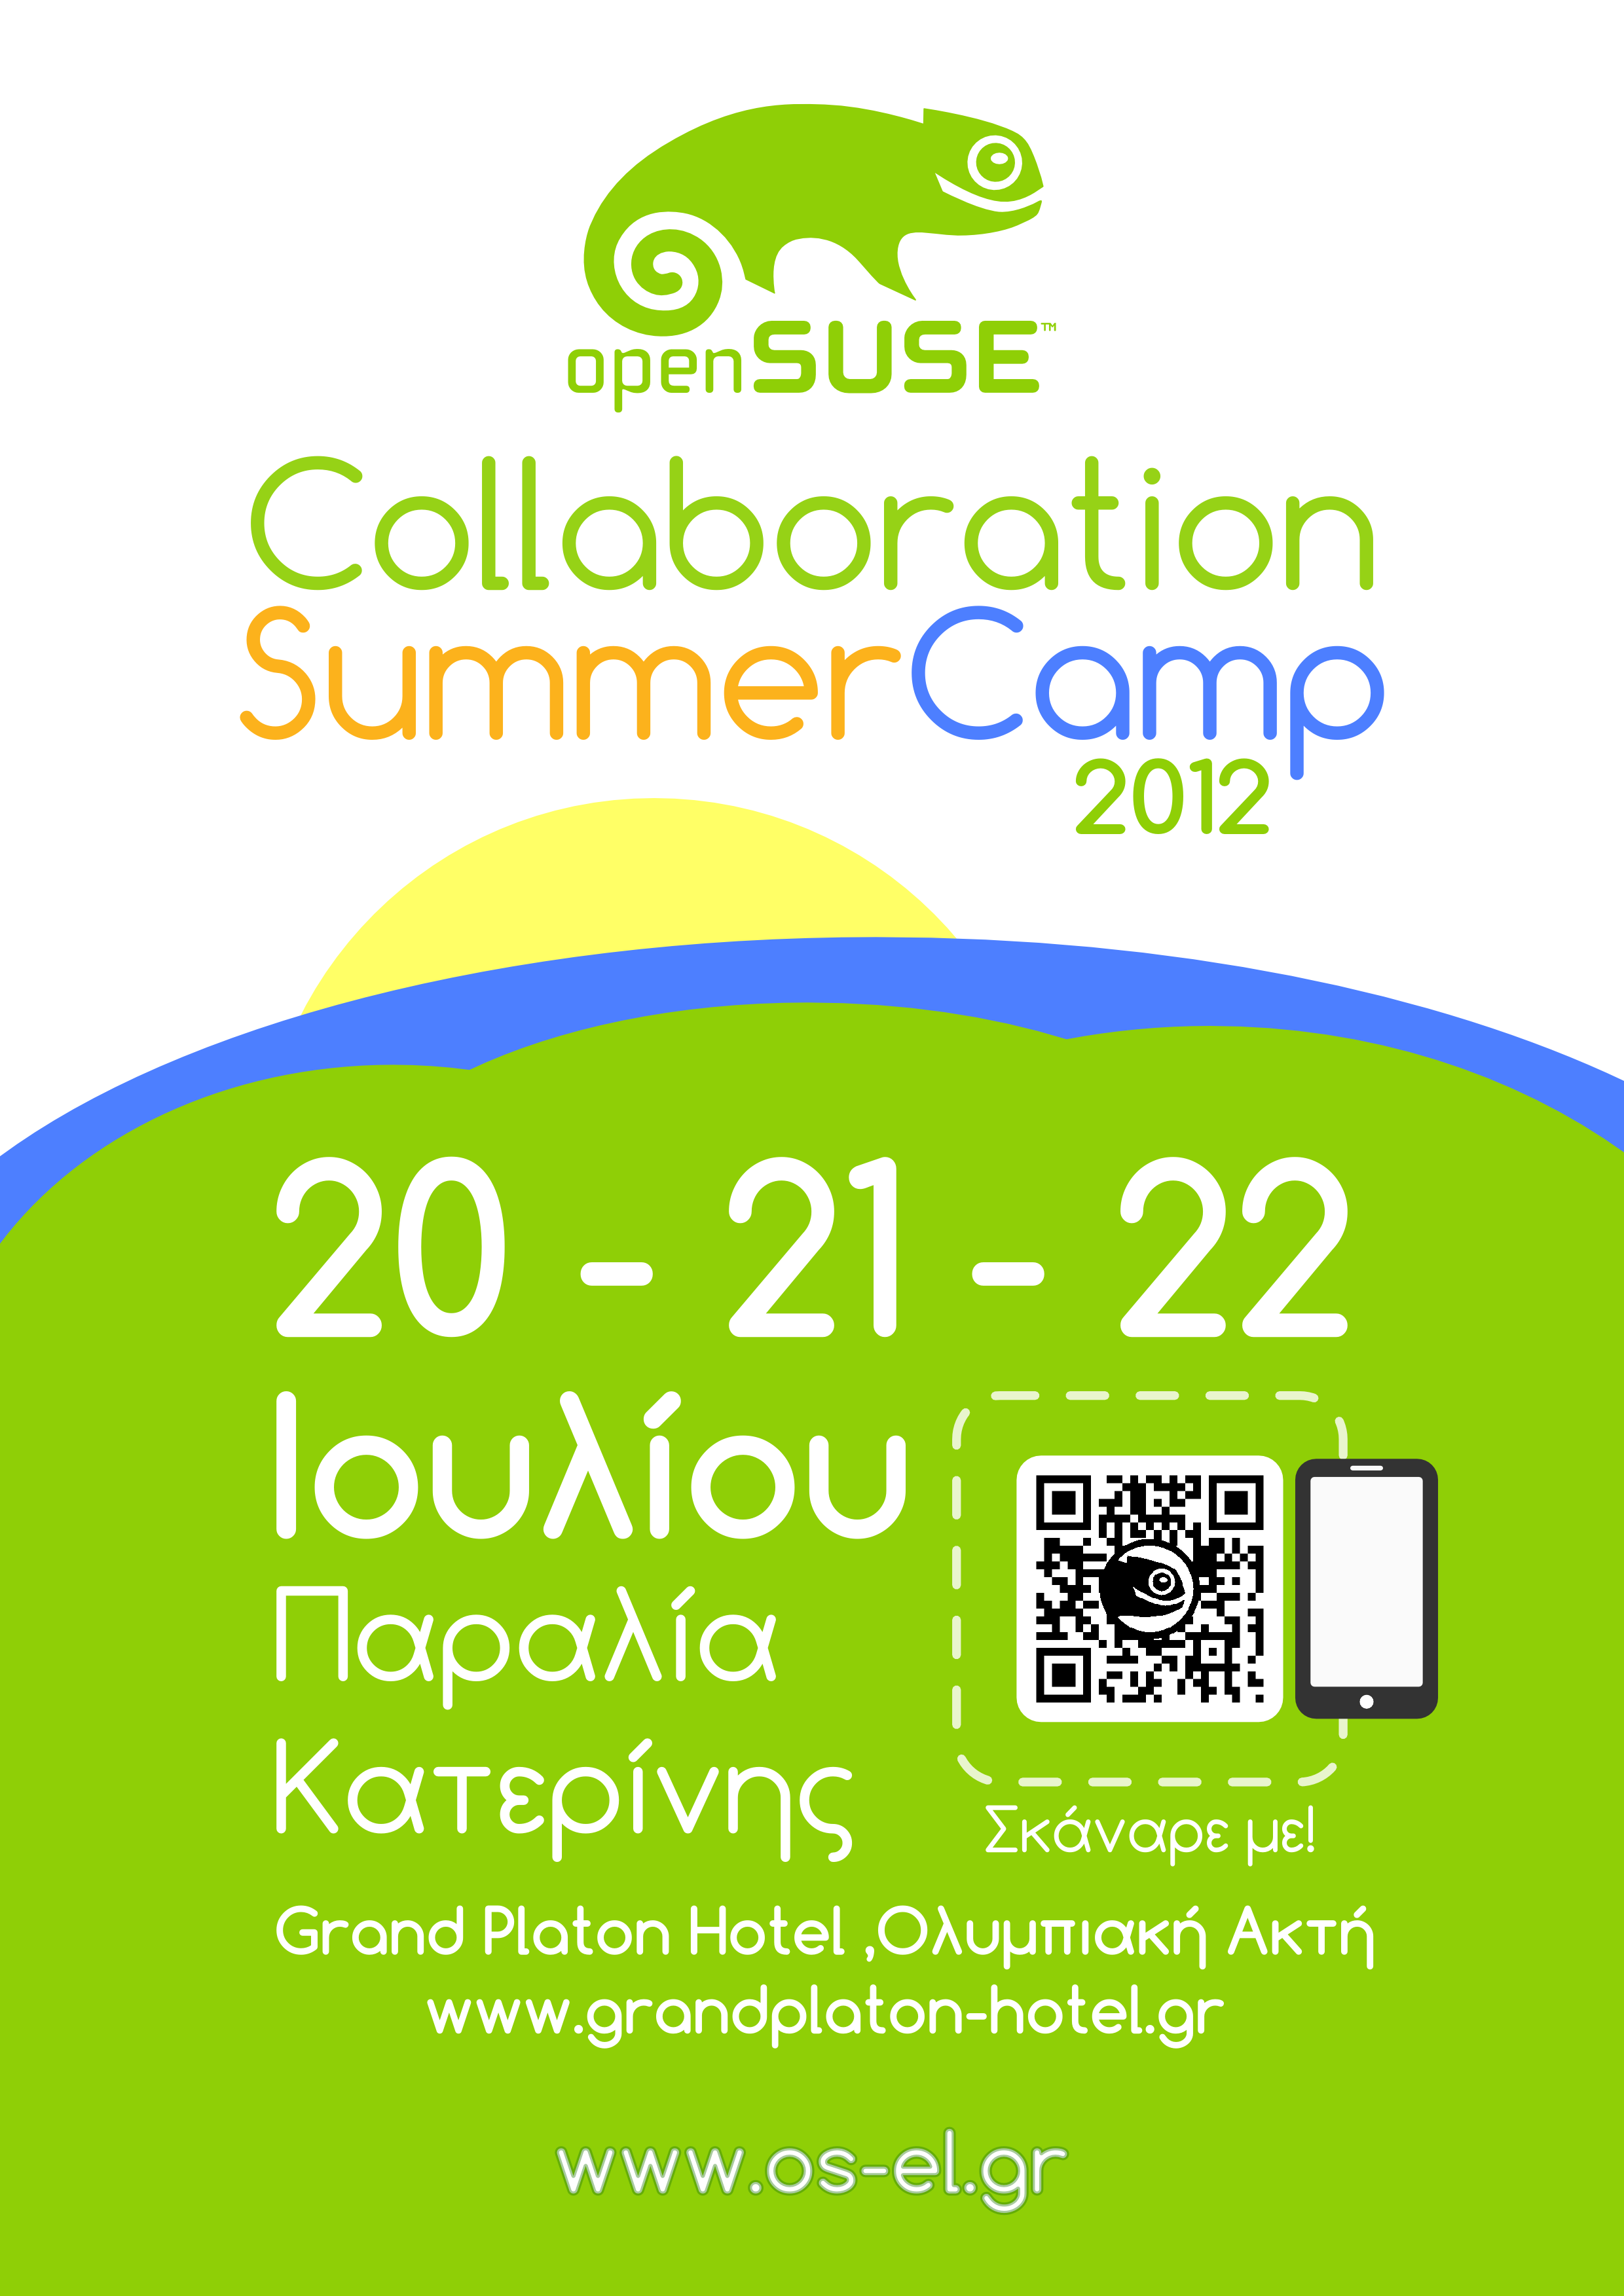 openSUSE Collaboration Summer Camp 2012